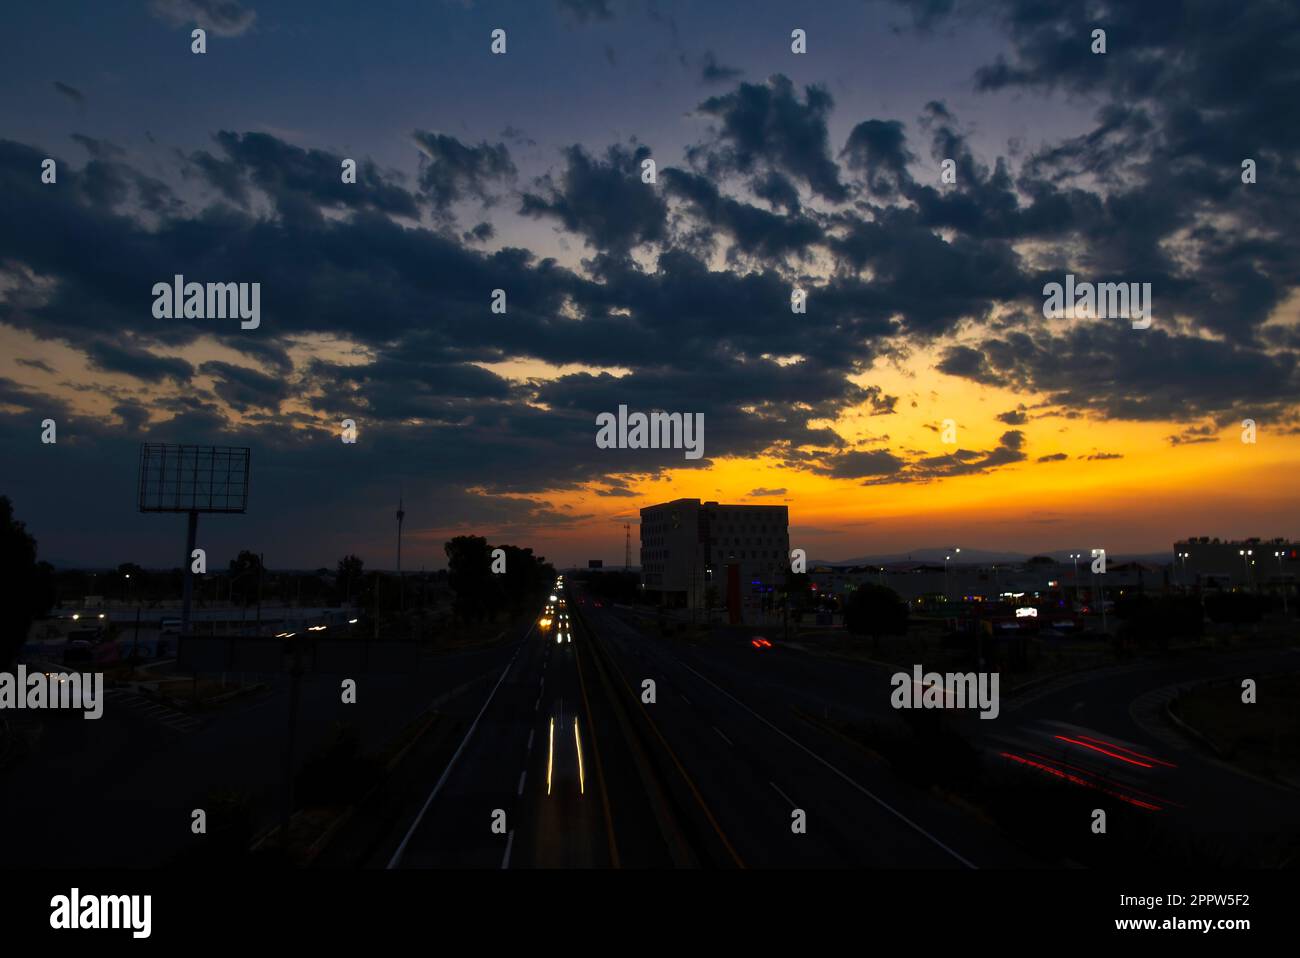 A sunset in the Queretaro city with a view of the highway and buildings Stock Photo